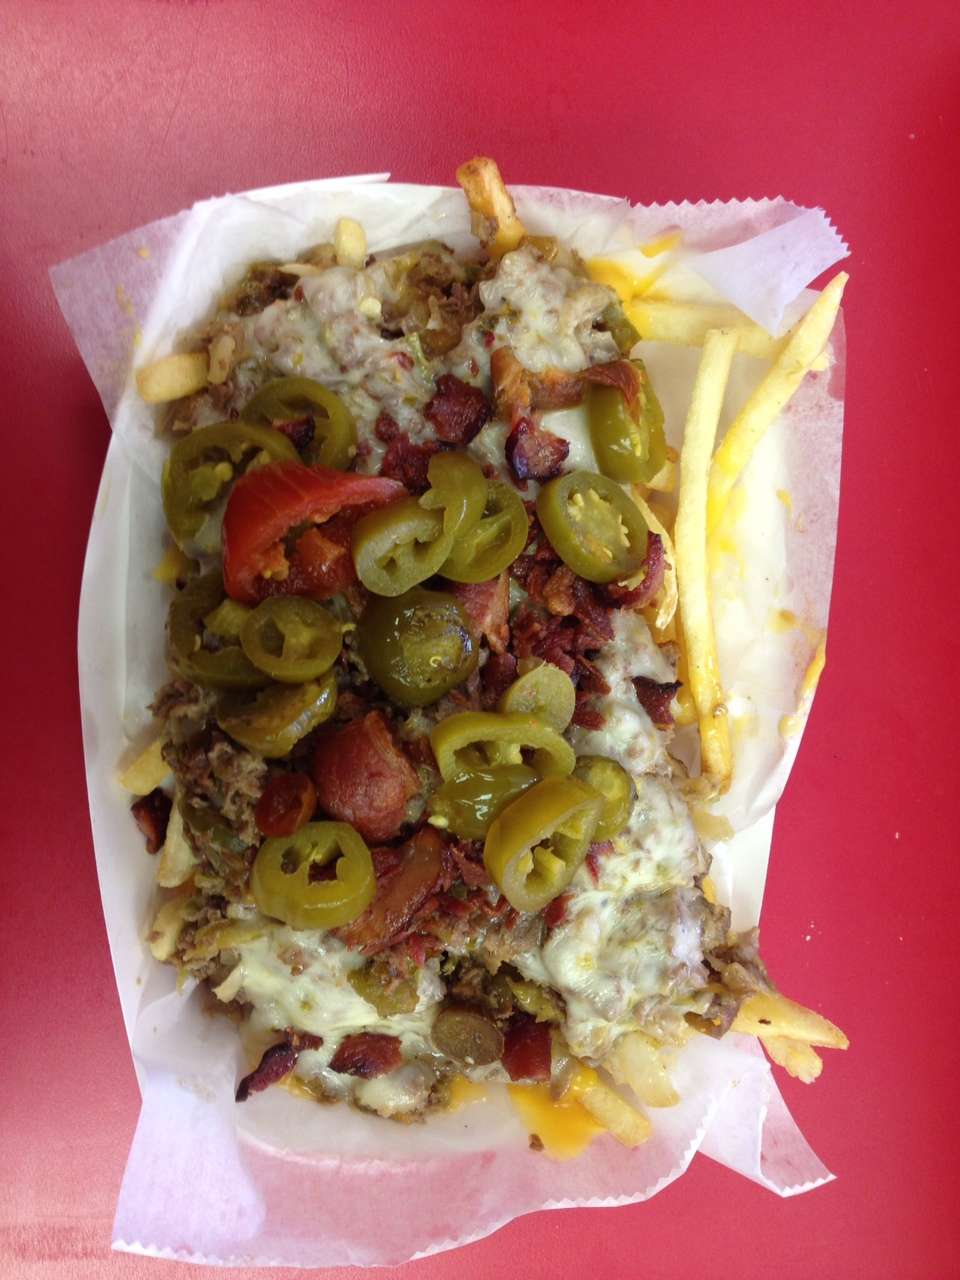 SteelCity CheeseSteaks | 3101 W 5th Ave, Gary, IN 46406 | Phone: (219) 977-9621